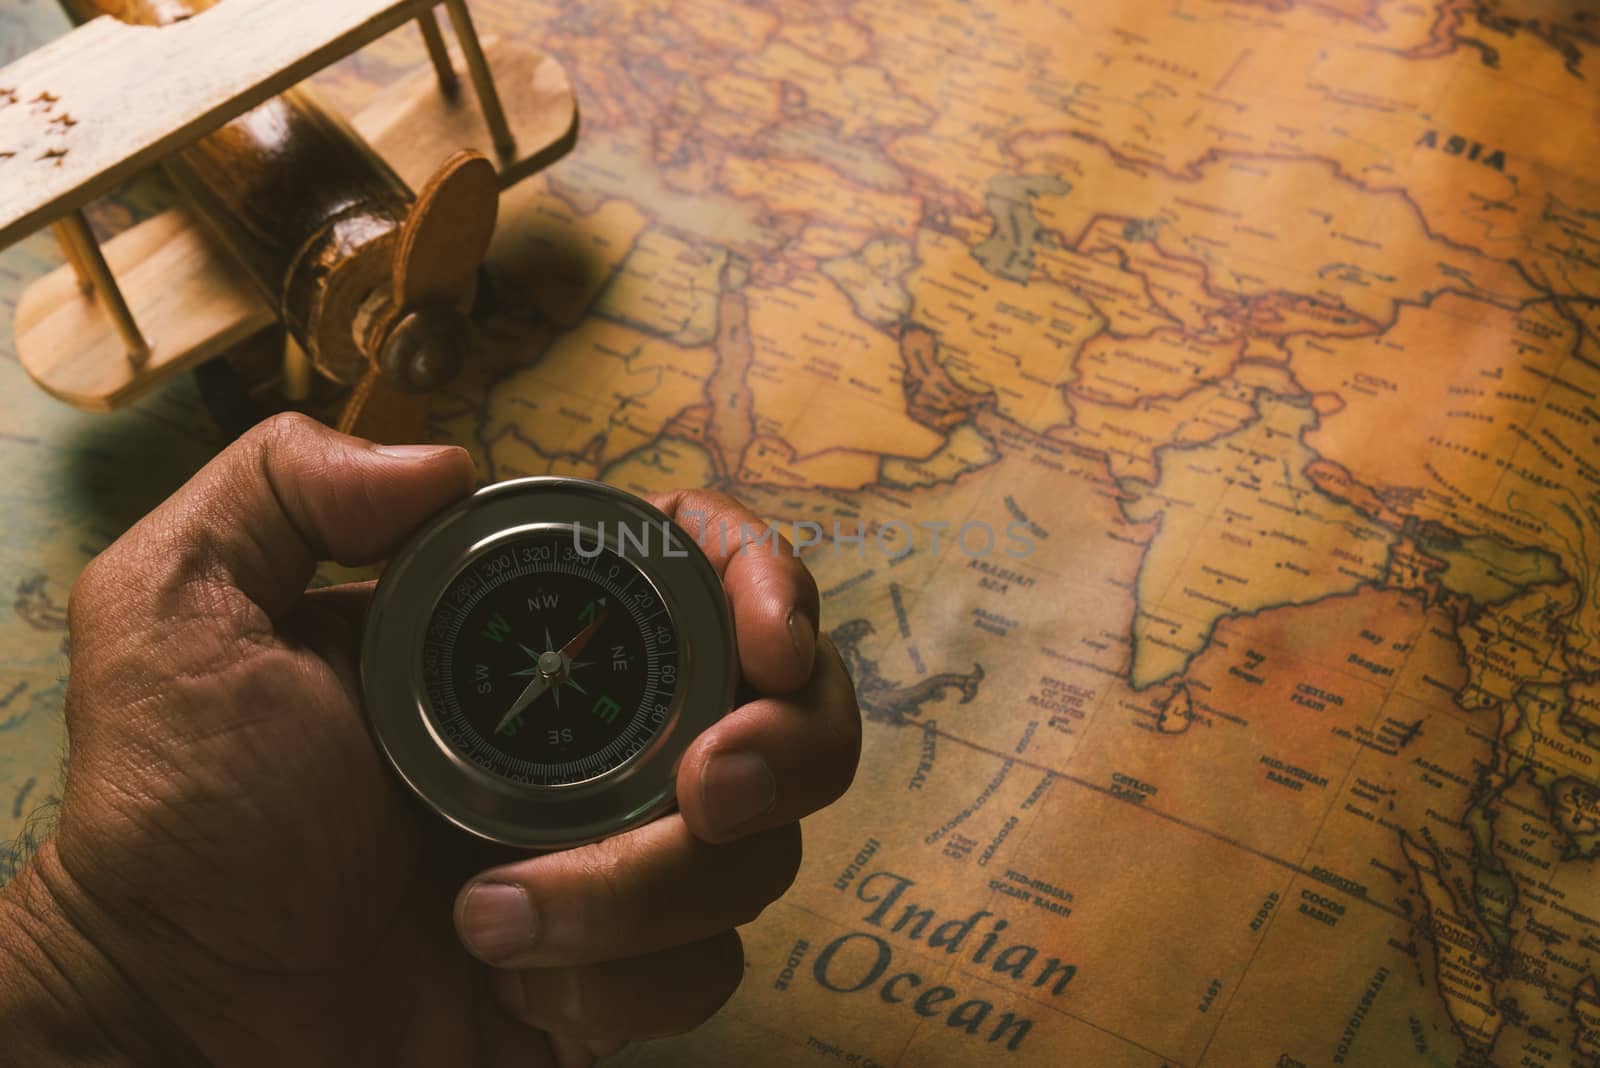 Hand hold old compass discovery and wooden plane on vintage paper antique world map background, Retro style cartography travel geography navigation